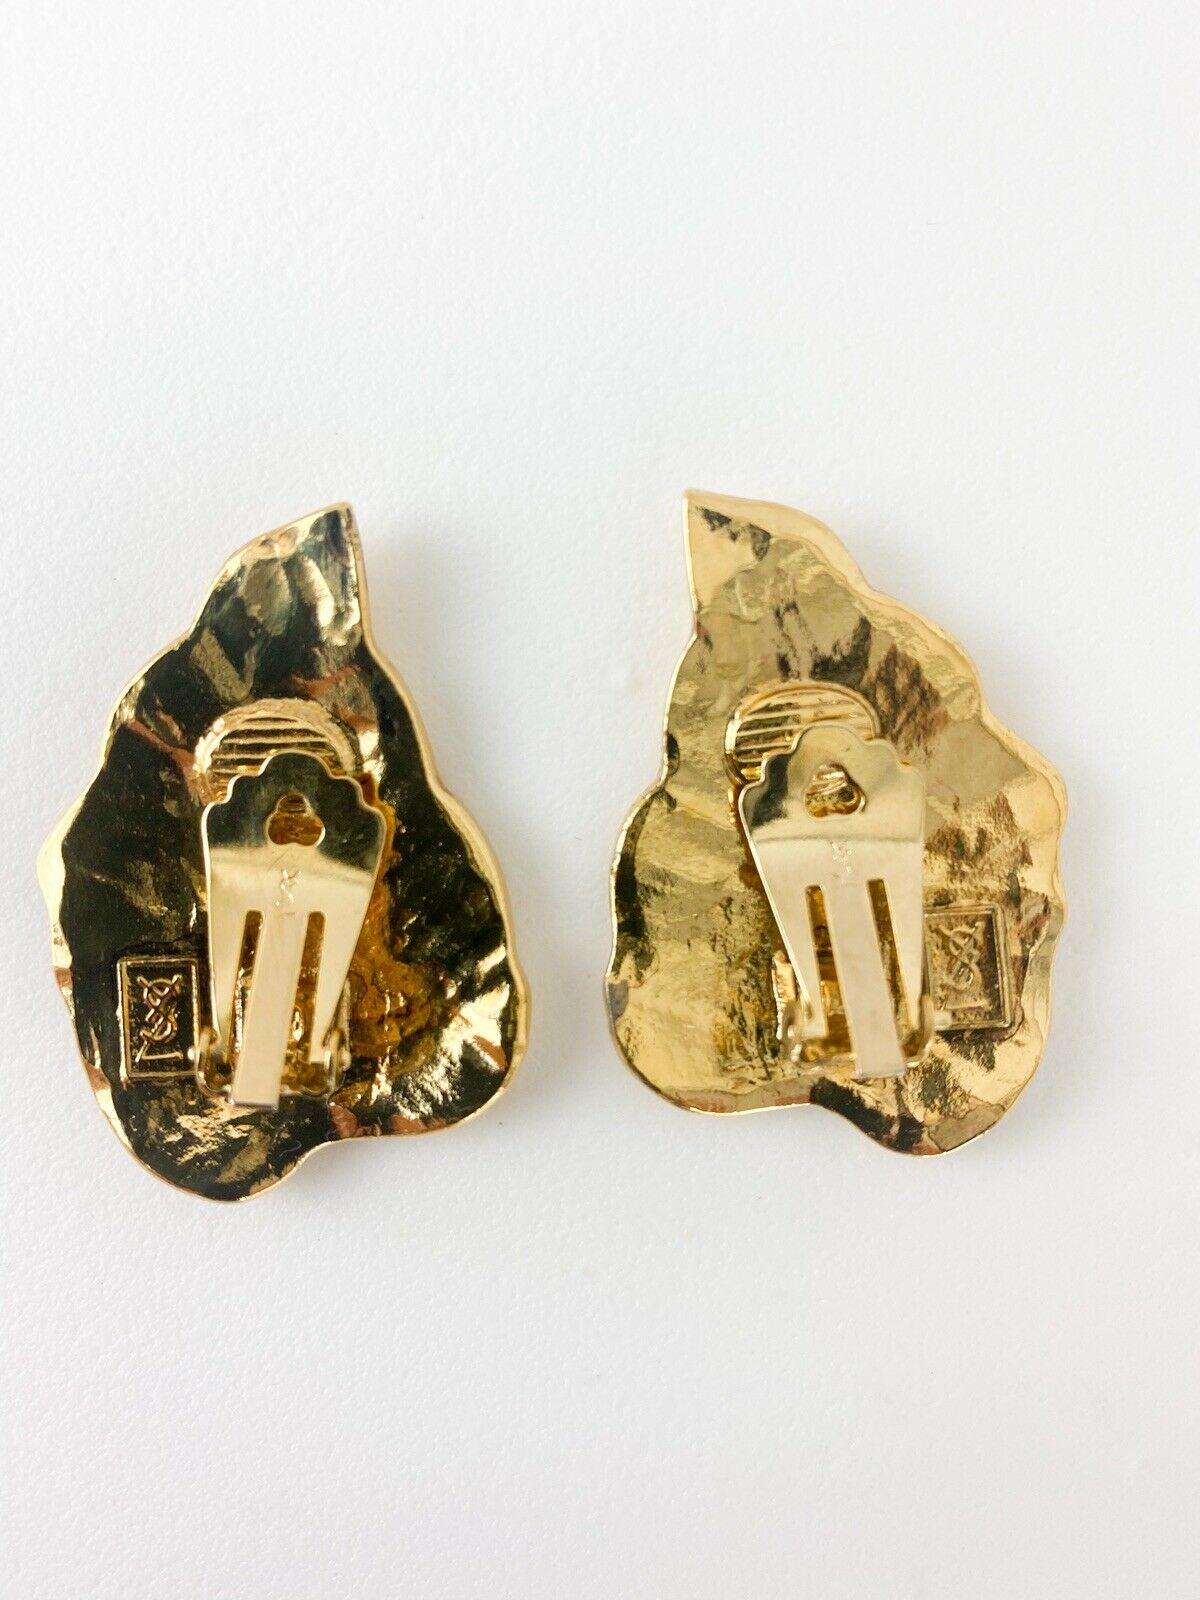 【SOLD OUT】YSL Yves Saint Laurent Vintage Gold Tone Leaf Earrings Stylish